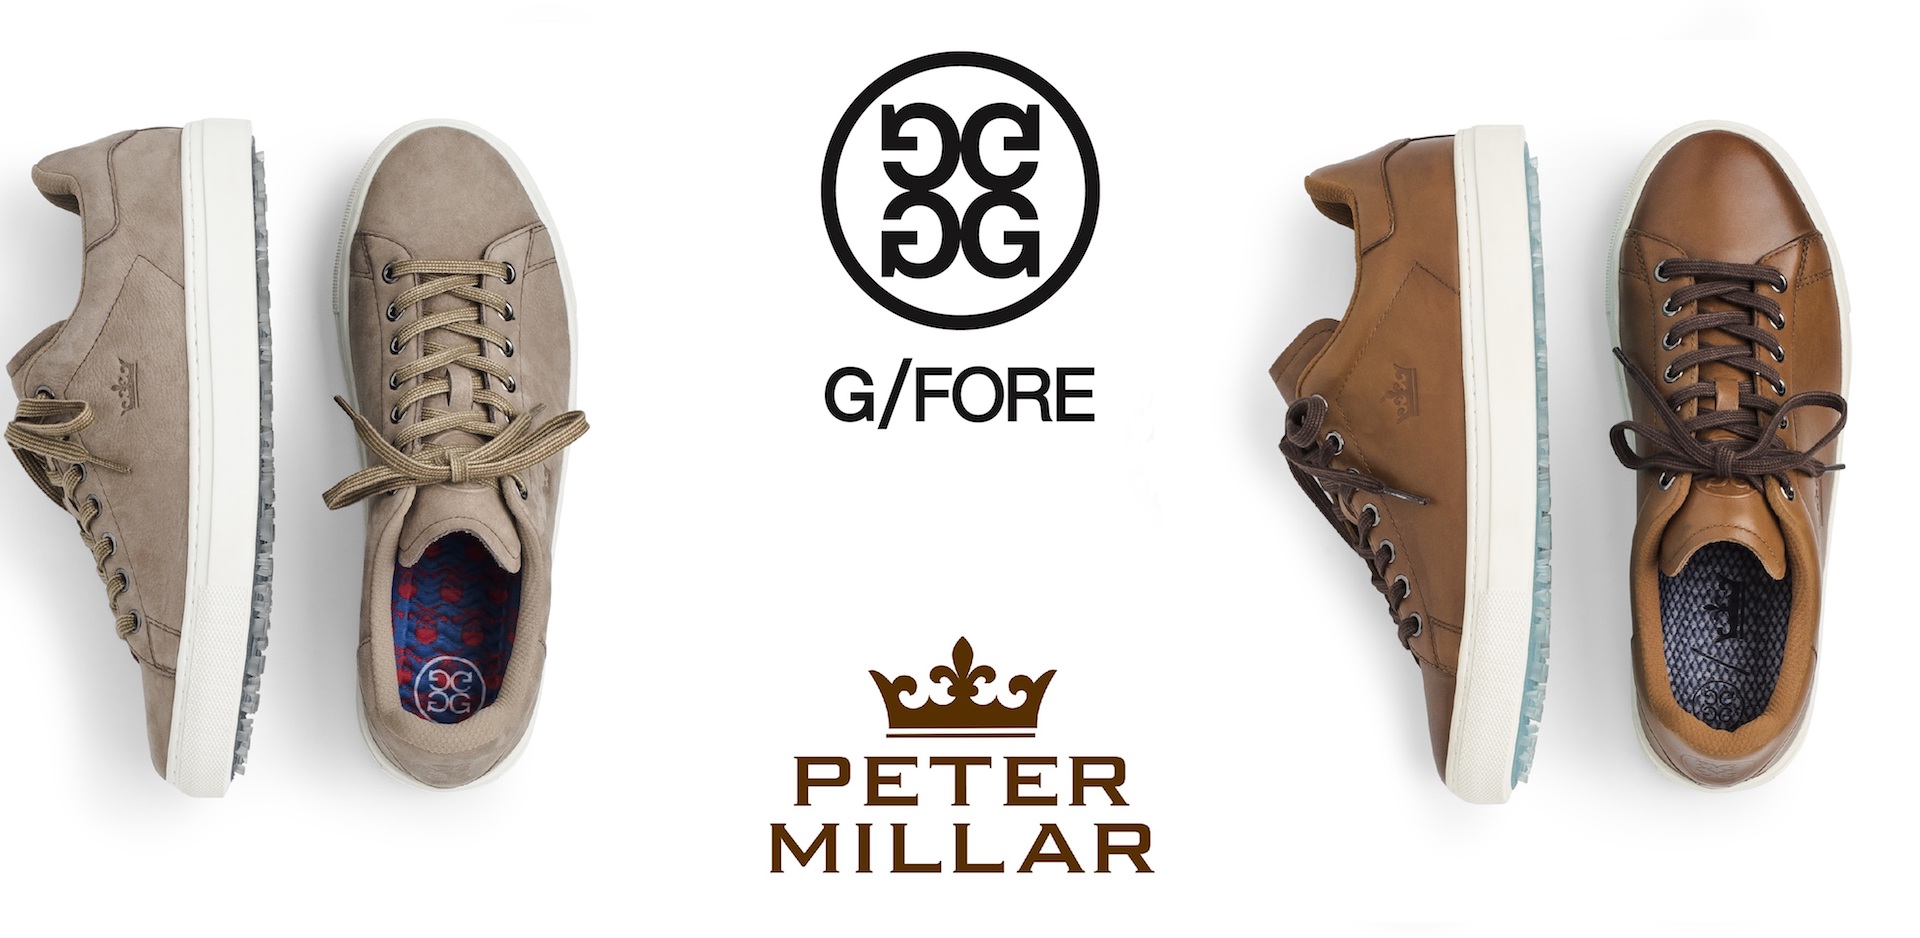 G/Fore and Peter Millar pair up 